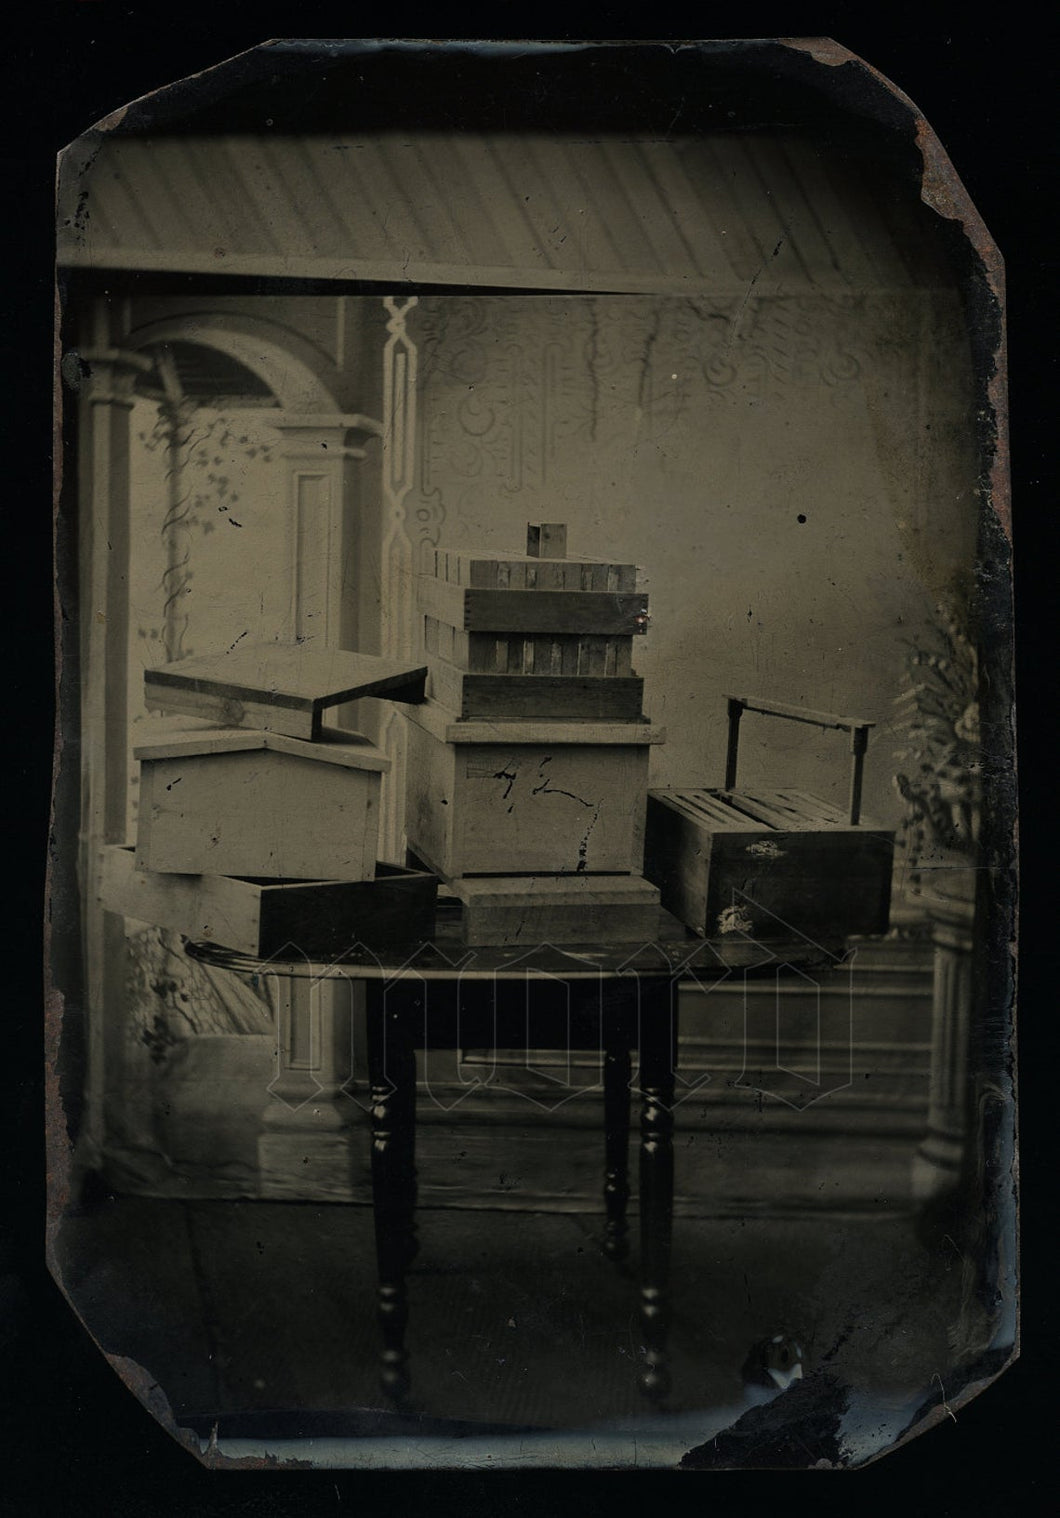 Very Rare & Unusual 1860s Tintype Photo - Beekeeping Hives - Occupational Int